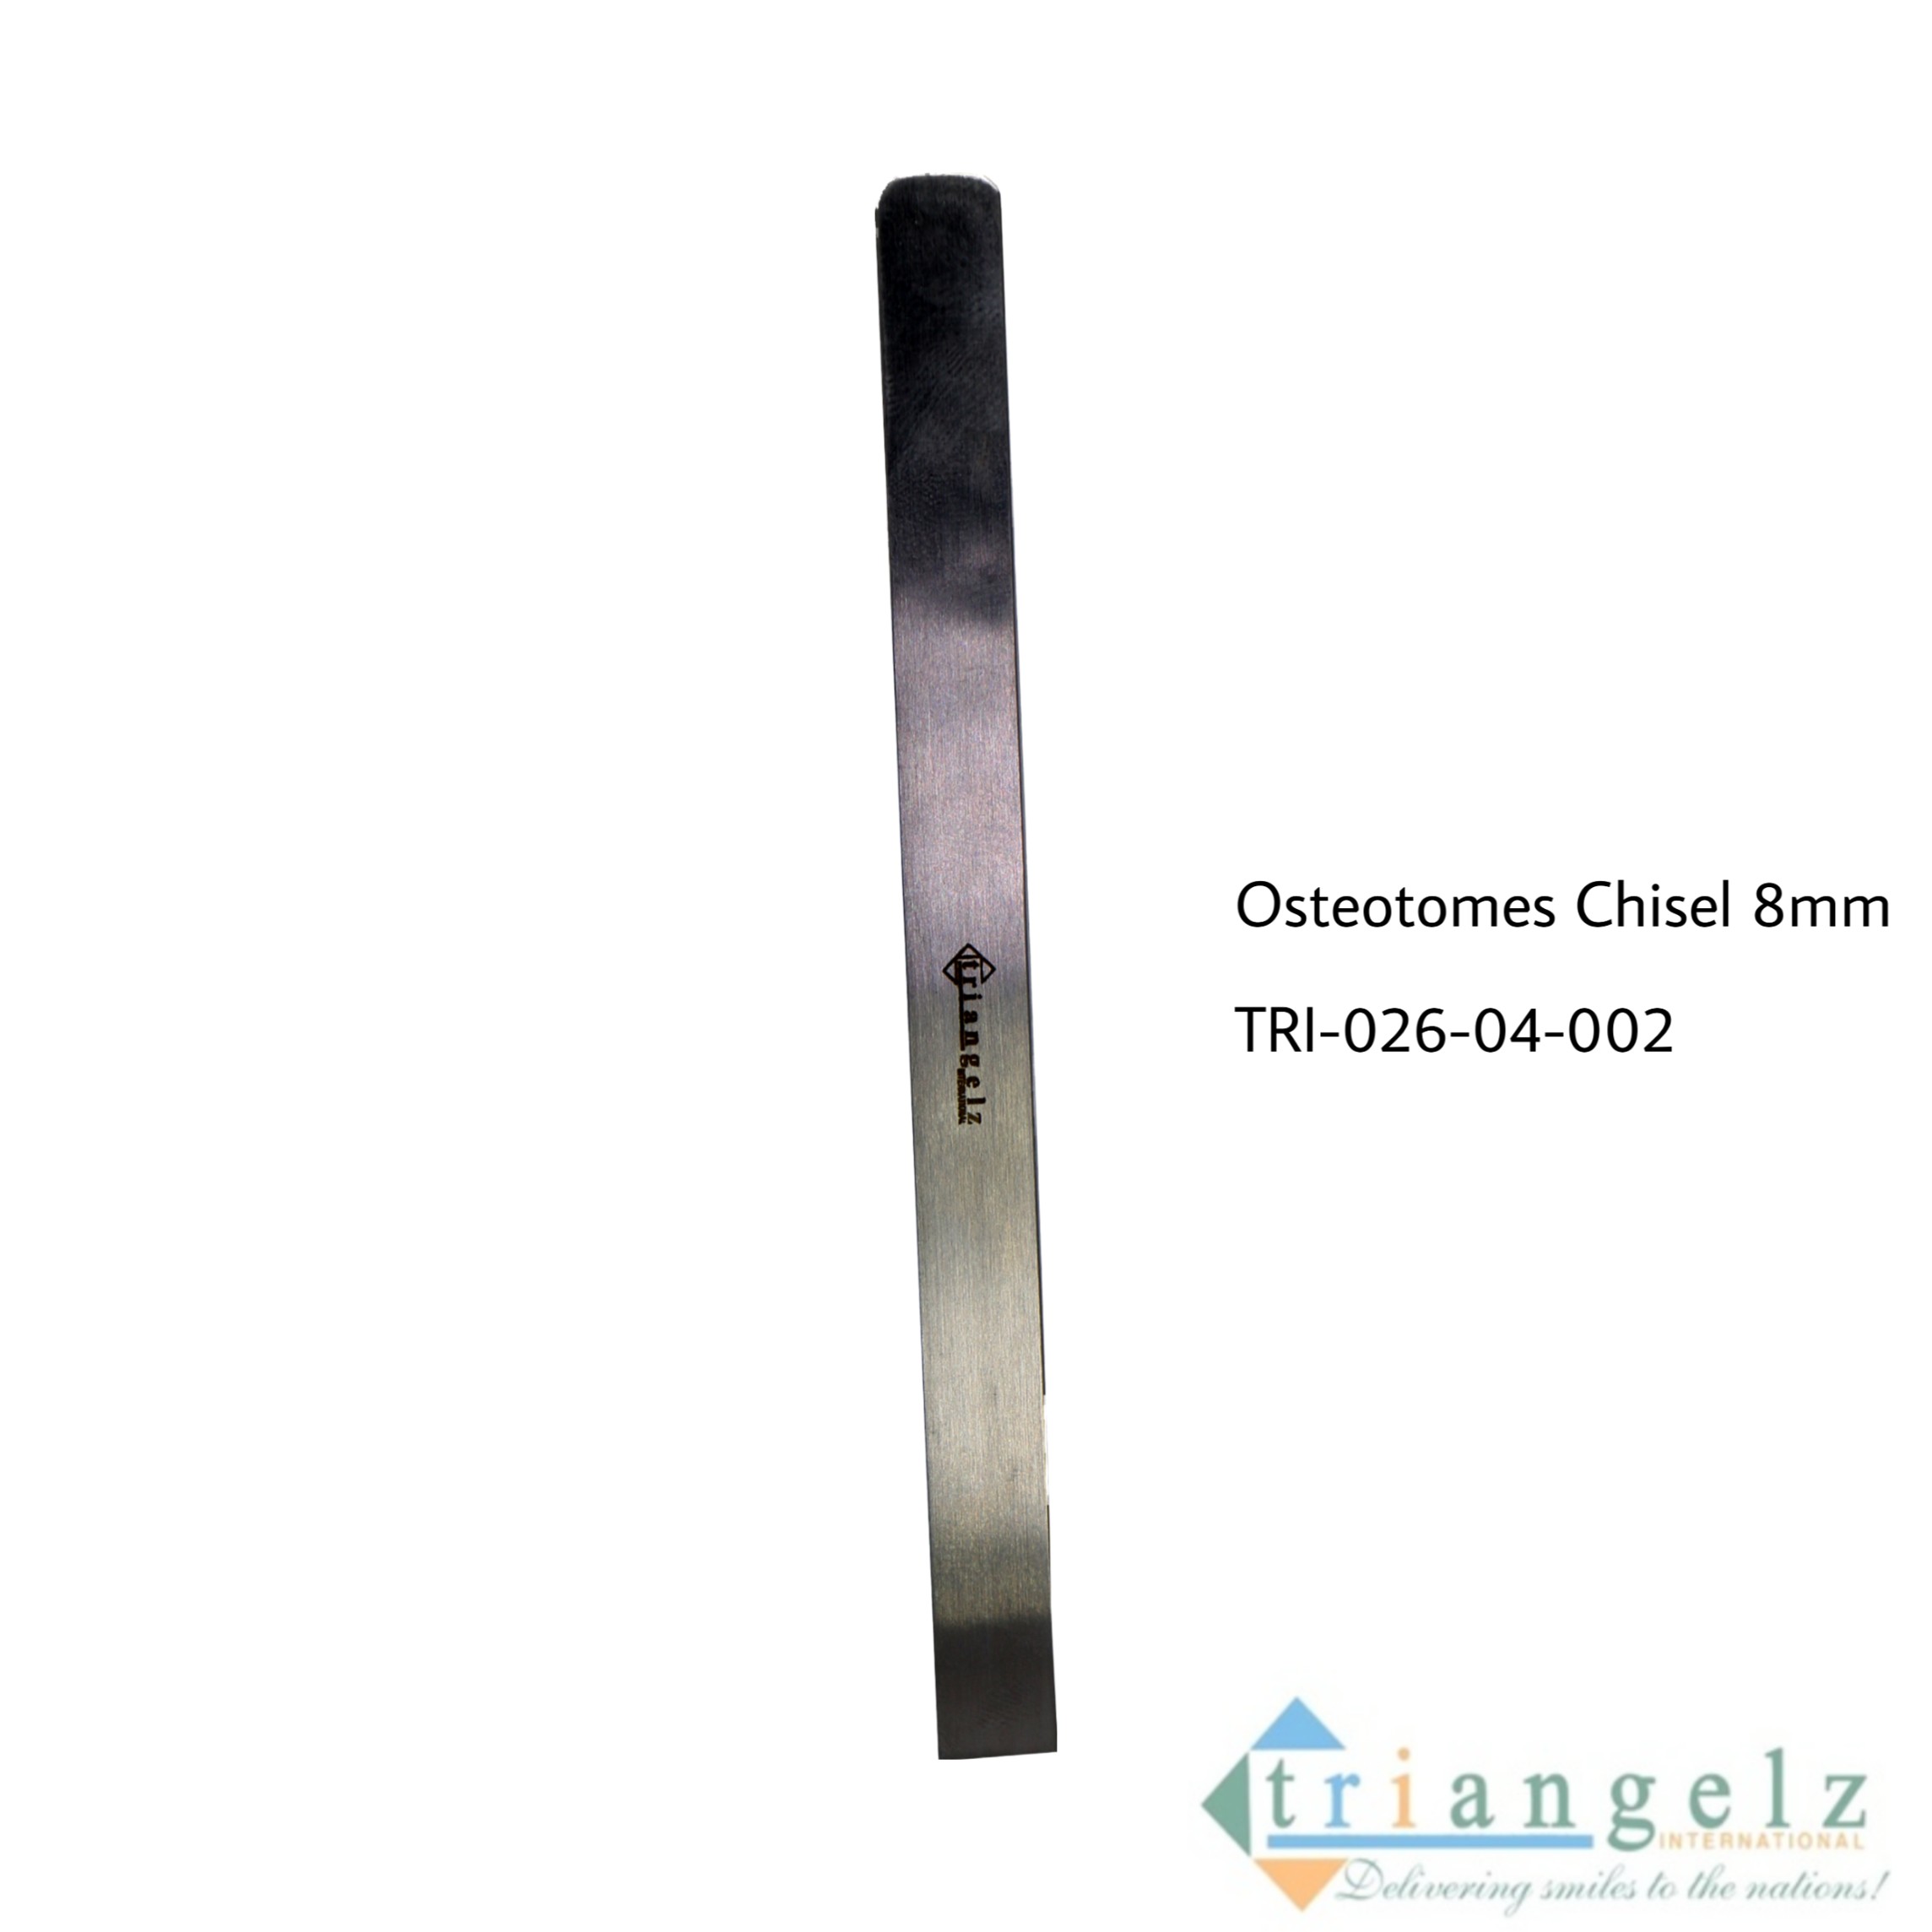 TRI-026-04-002 Osteotomes Chisel 8mm